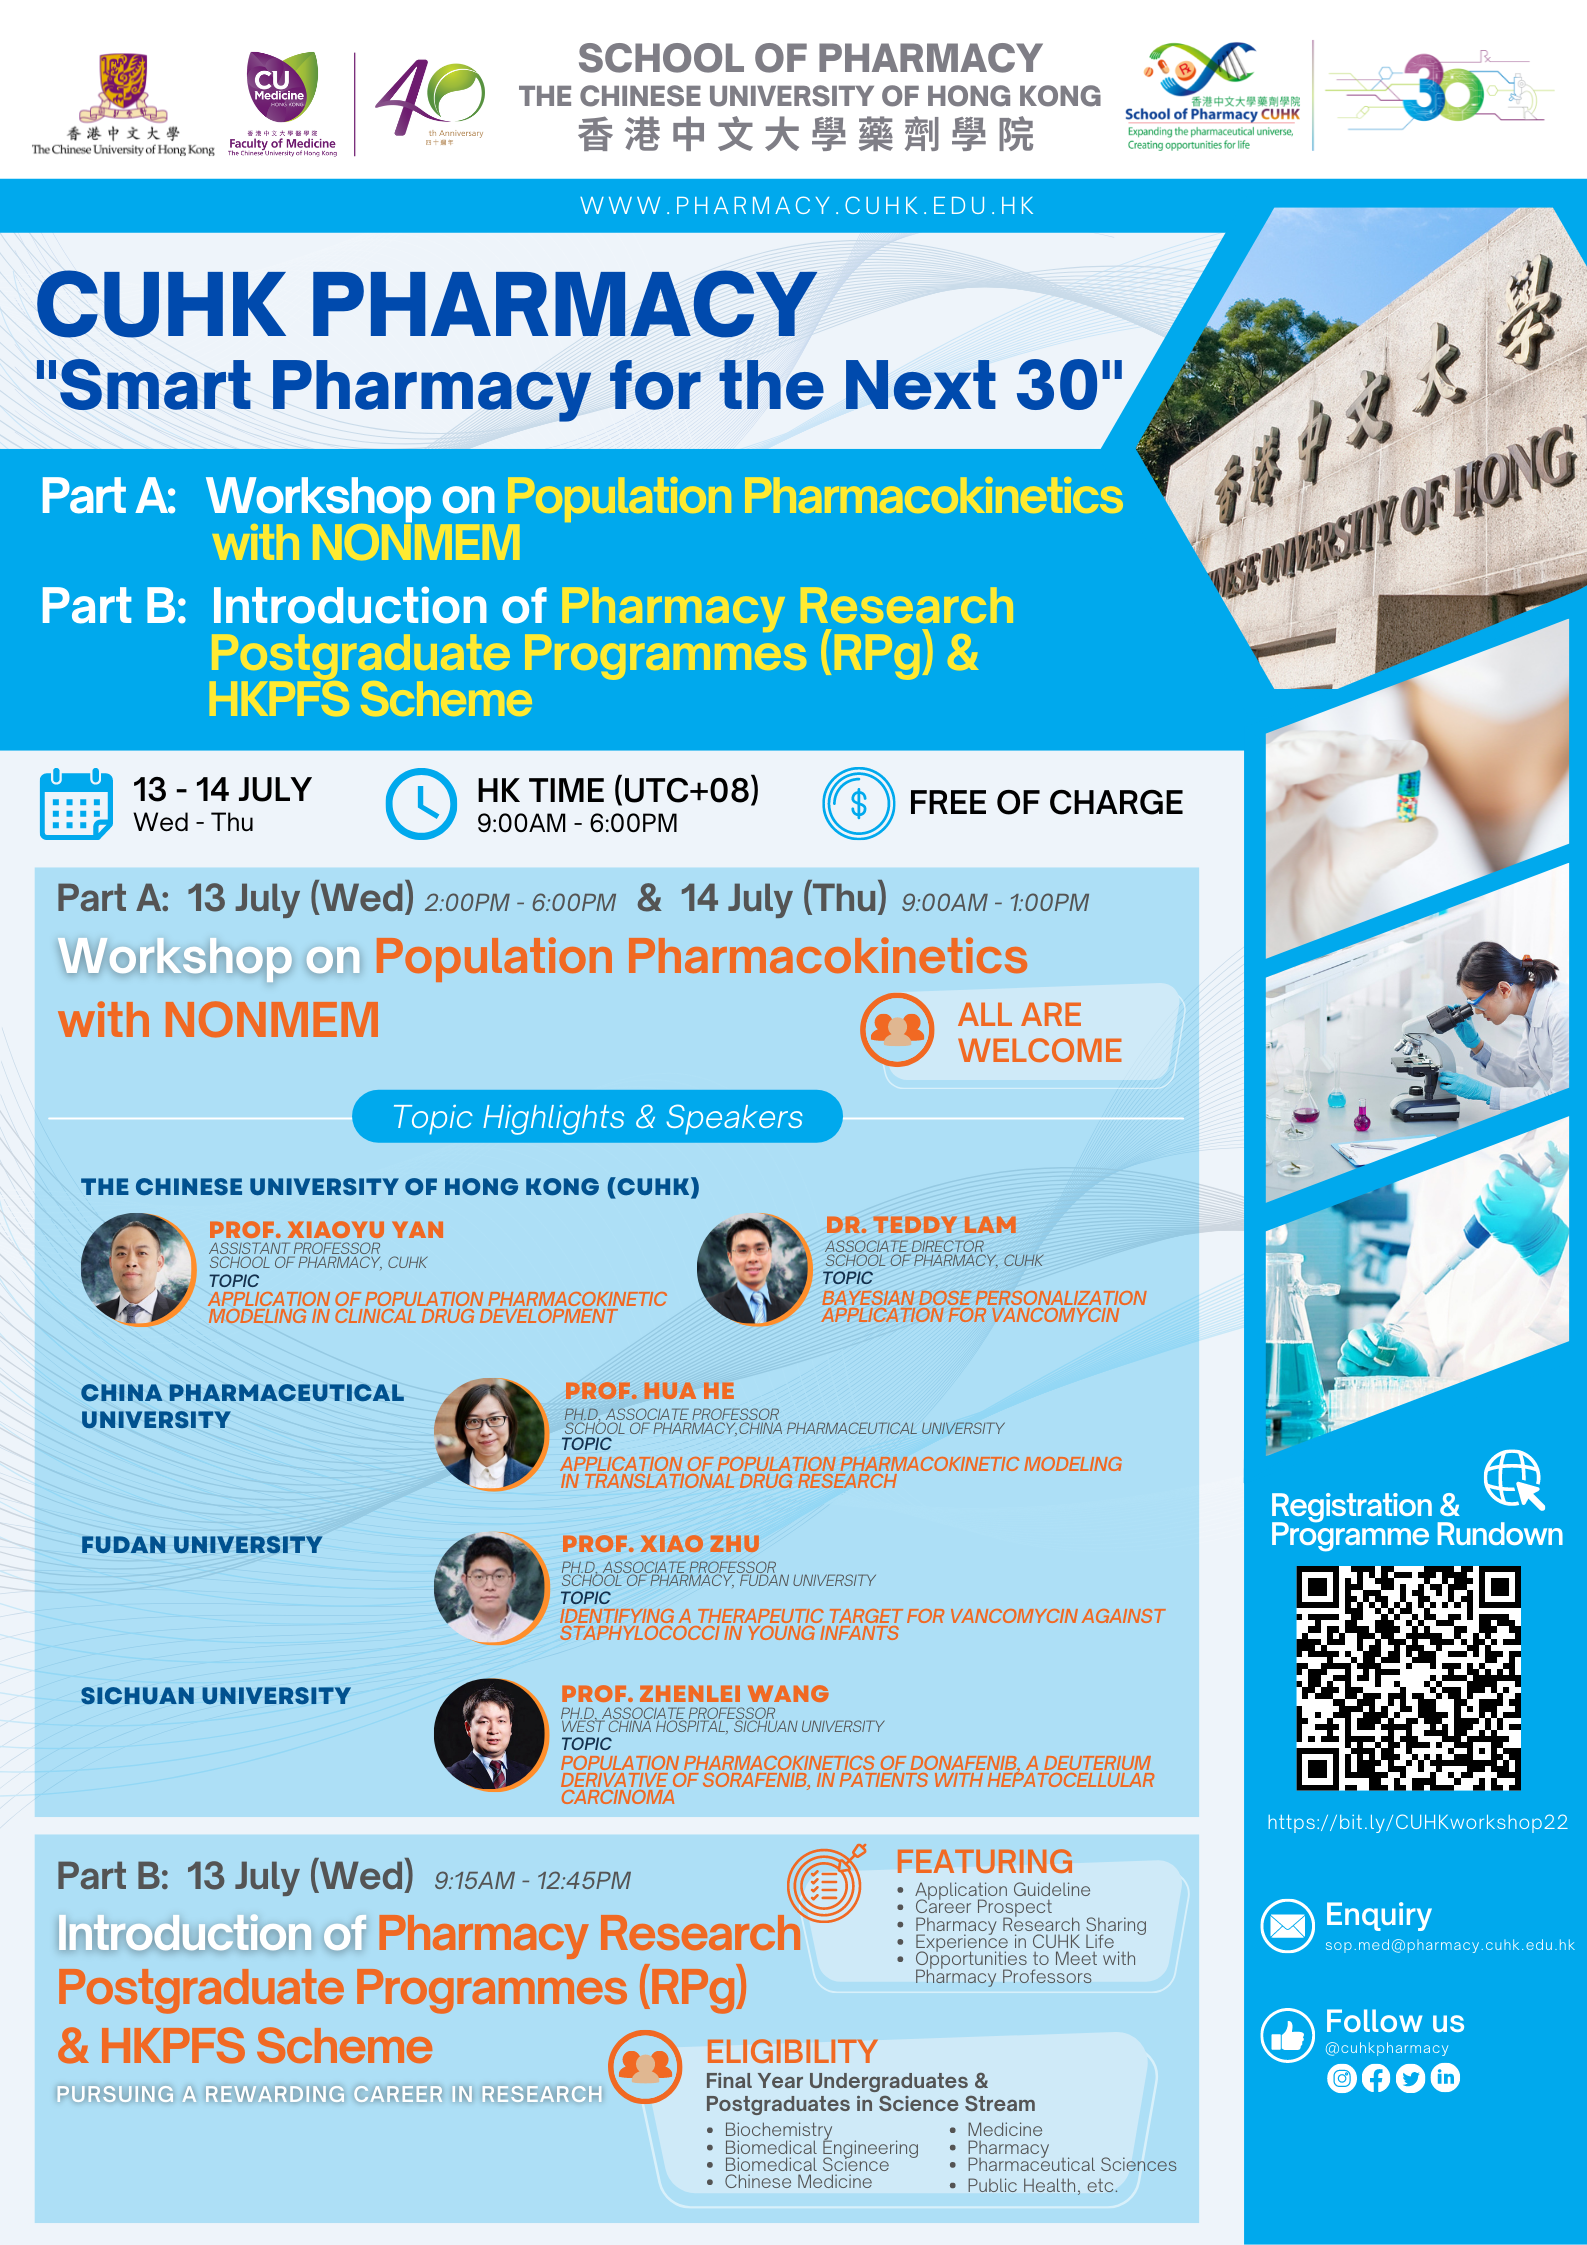 “Smart Pharmacy for the Next 30” - A webinar series to celebrate 3 decades of pharmacy education